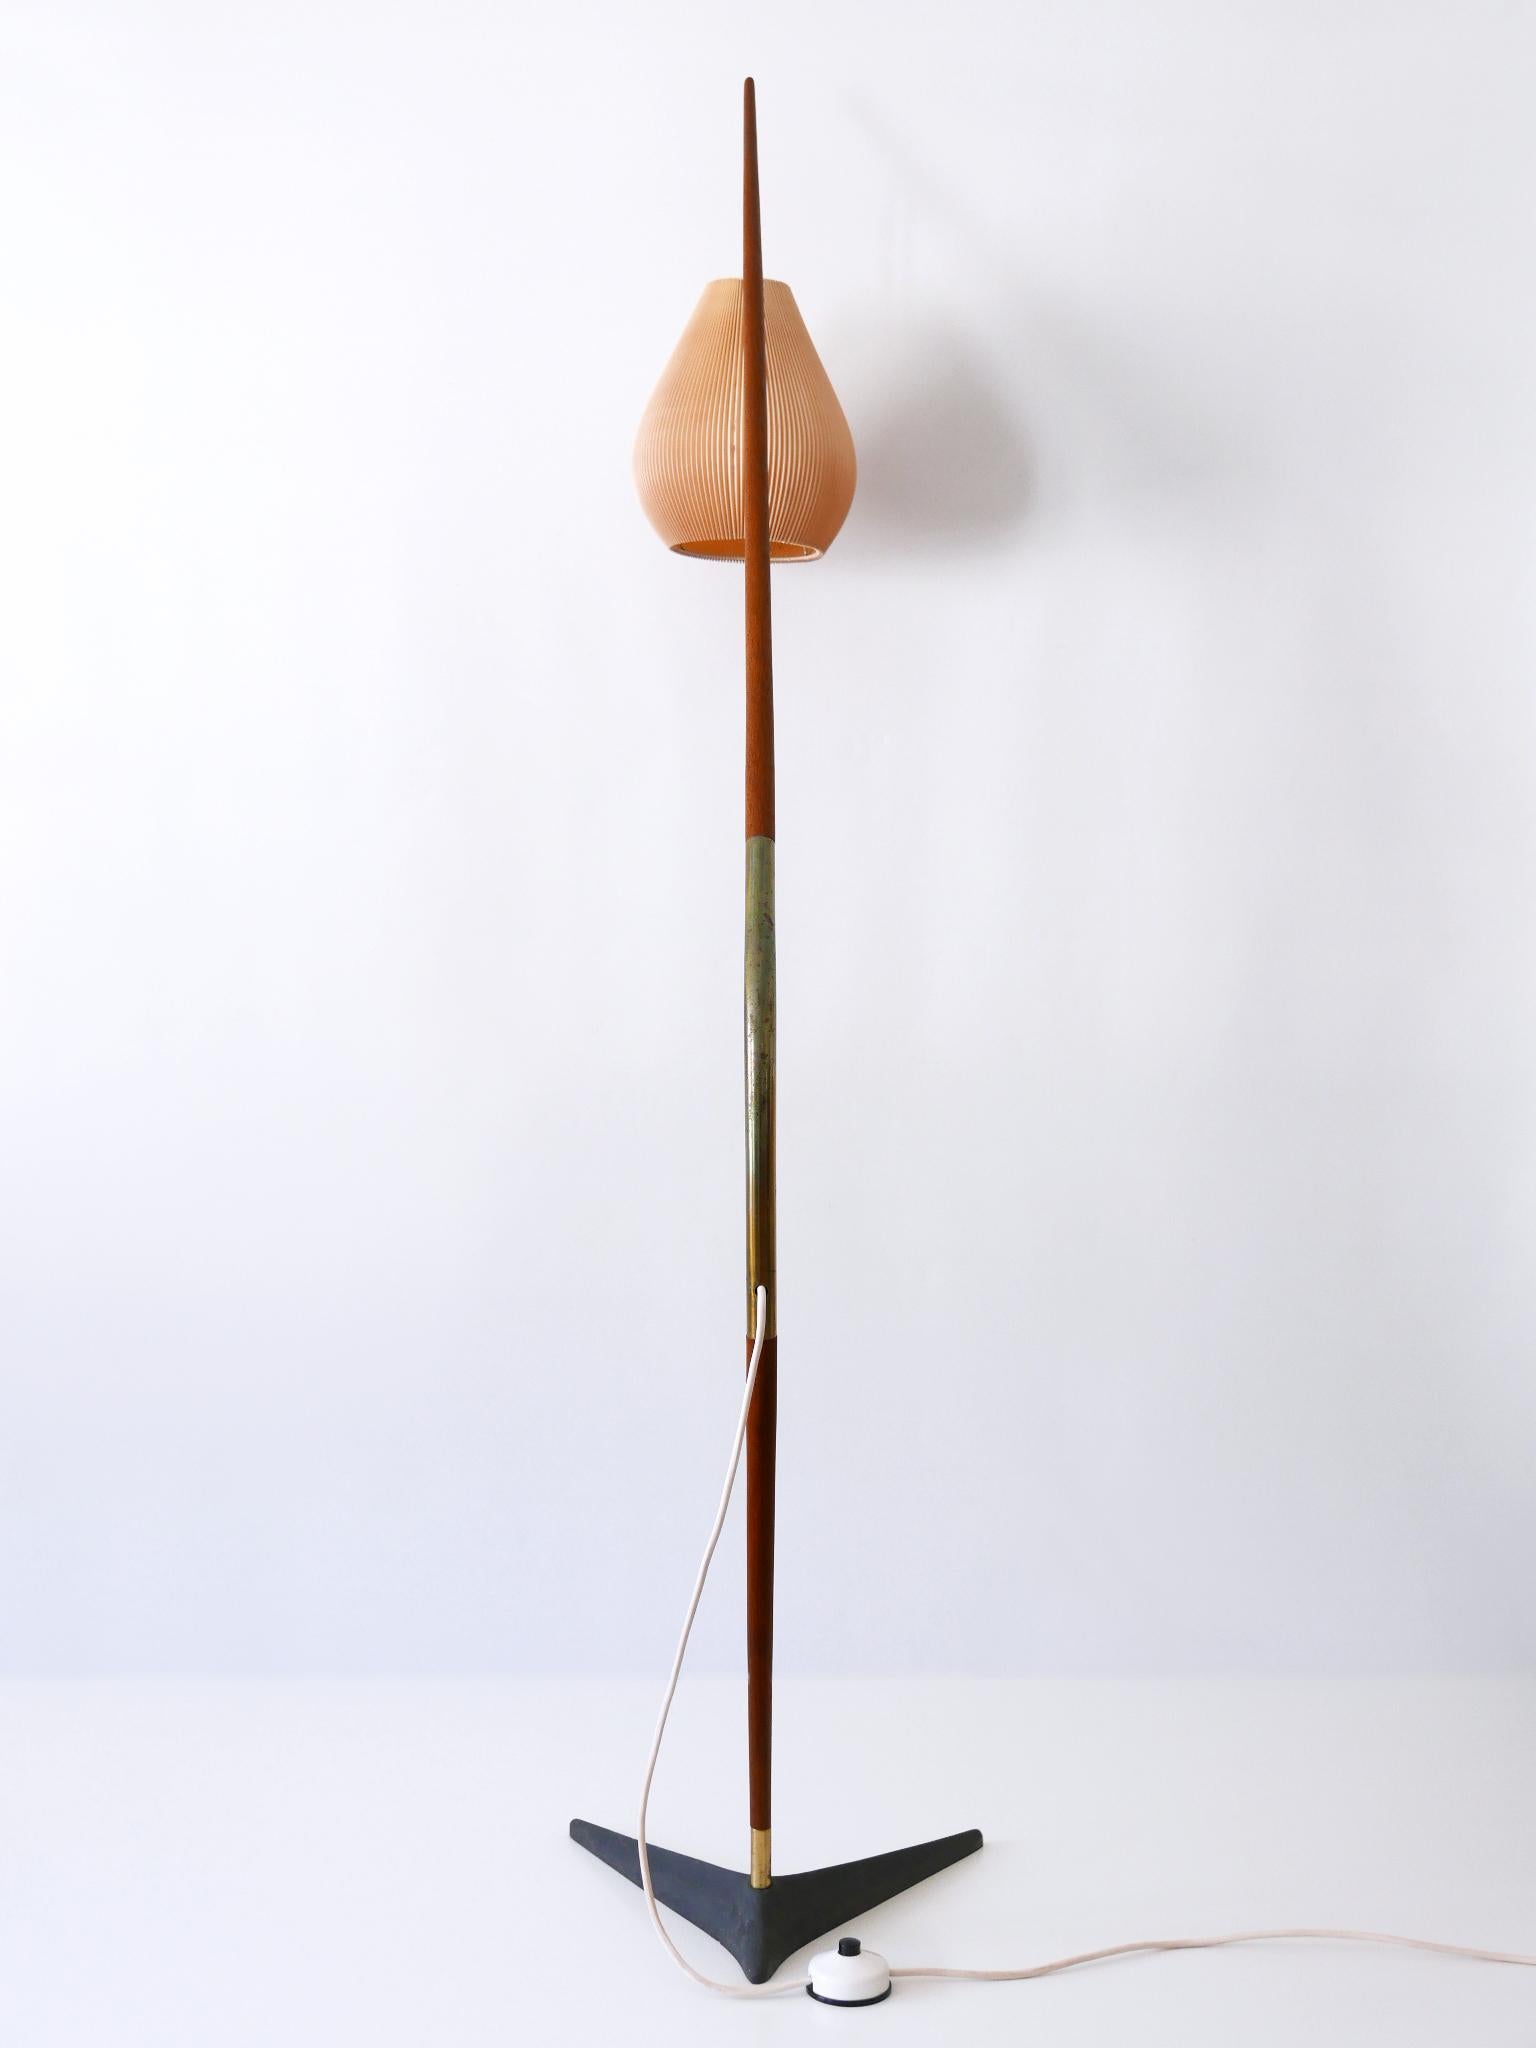 Mid-20th Century Exceptional 'Fishing Pole' Floor Lamp by Svend Aage Holm Sørensen Denmark 1950s For Sale